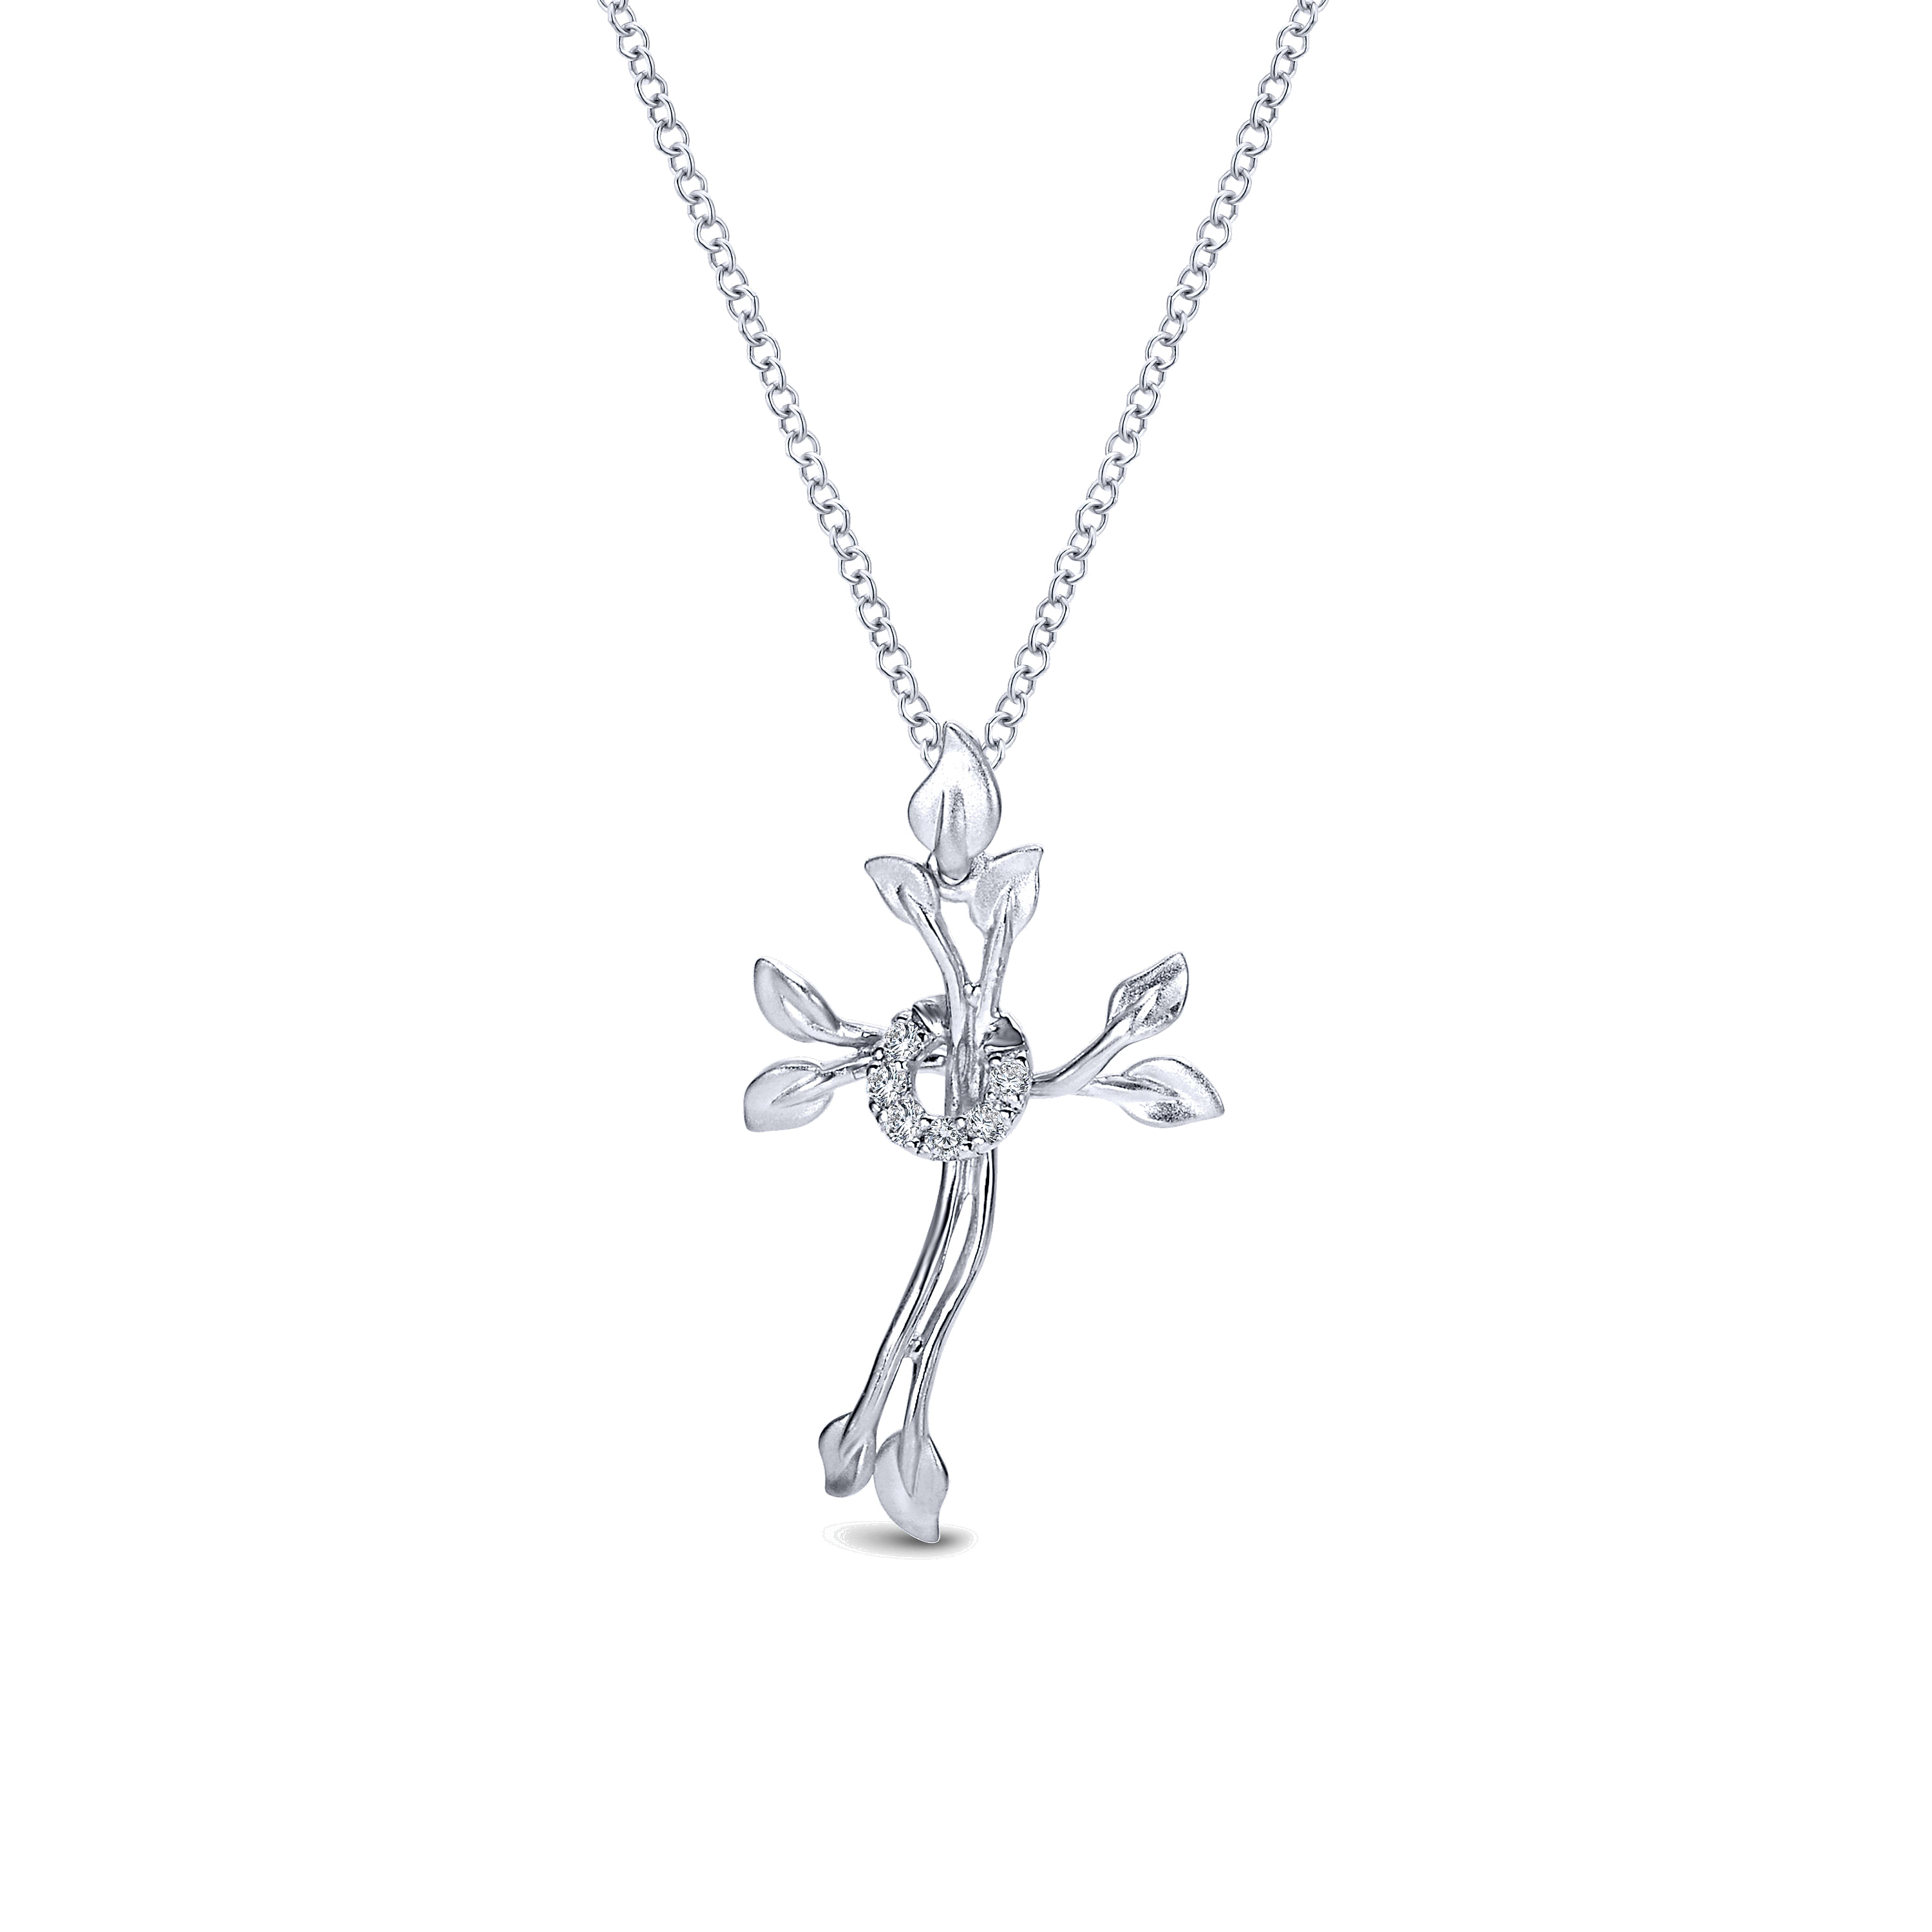 18 inch 925 Sterling Silver Twisted Wreath Cross Pendant with Diamond and Leaf Accents